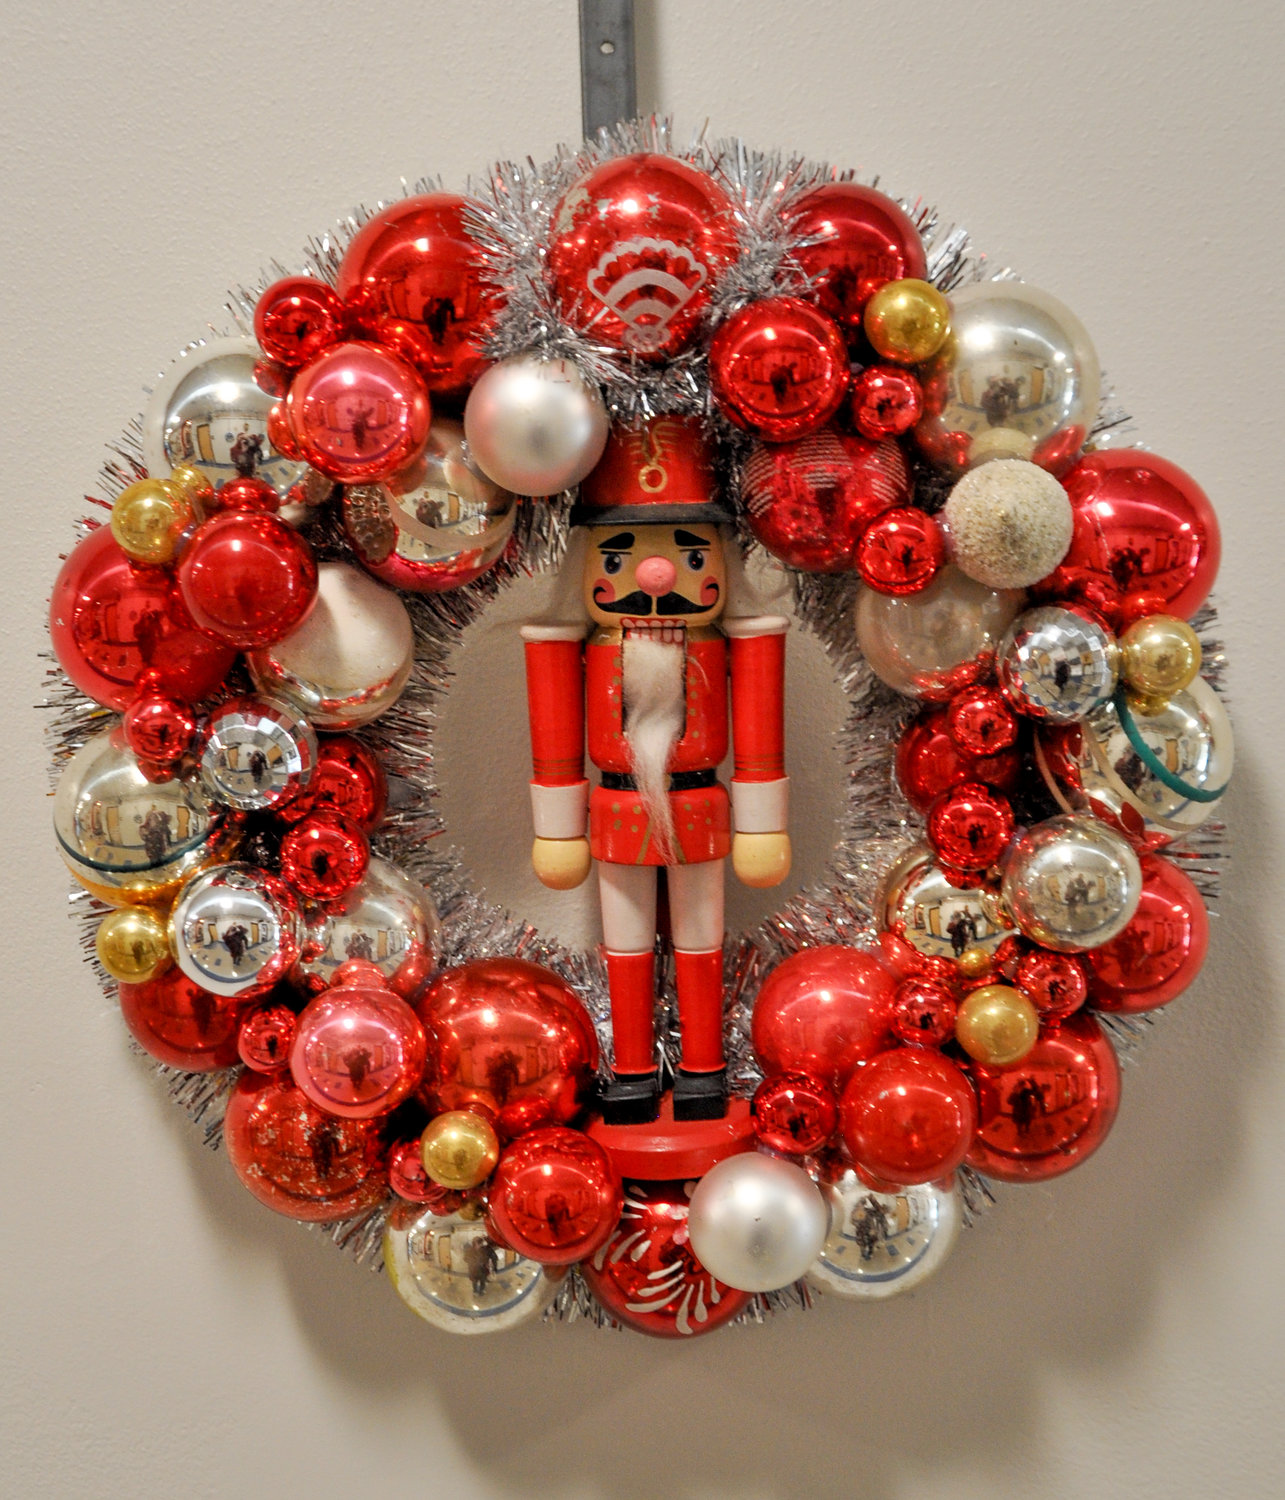 Brandi Merolla's Vintage Ornament Wreaths Show at the Narrowburg Union iscomprised of Shiny-Brite balls, old fashioned Santas and snowman ornaments.